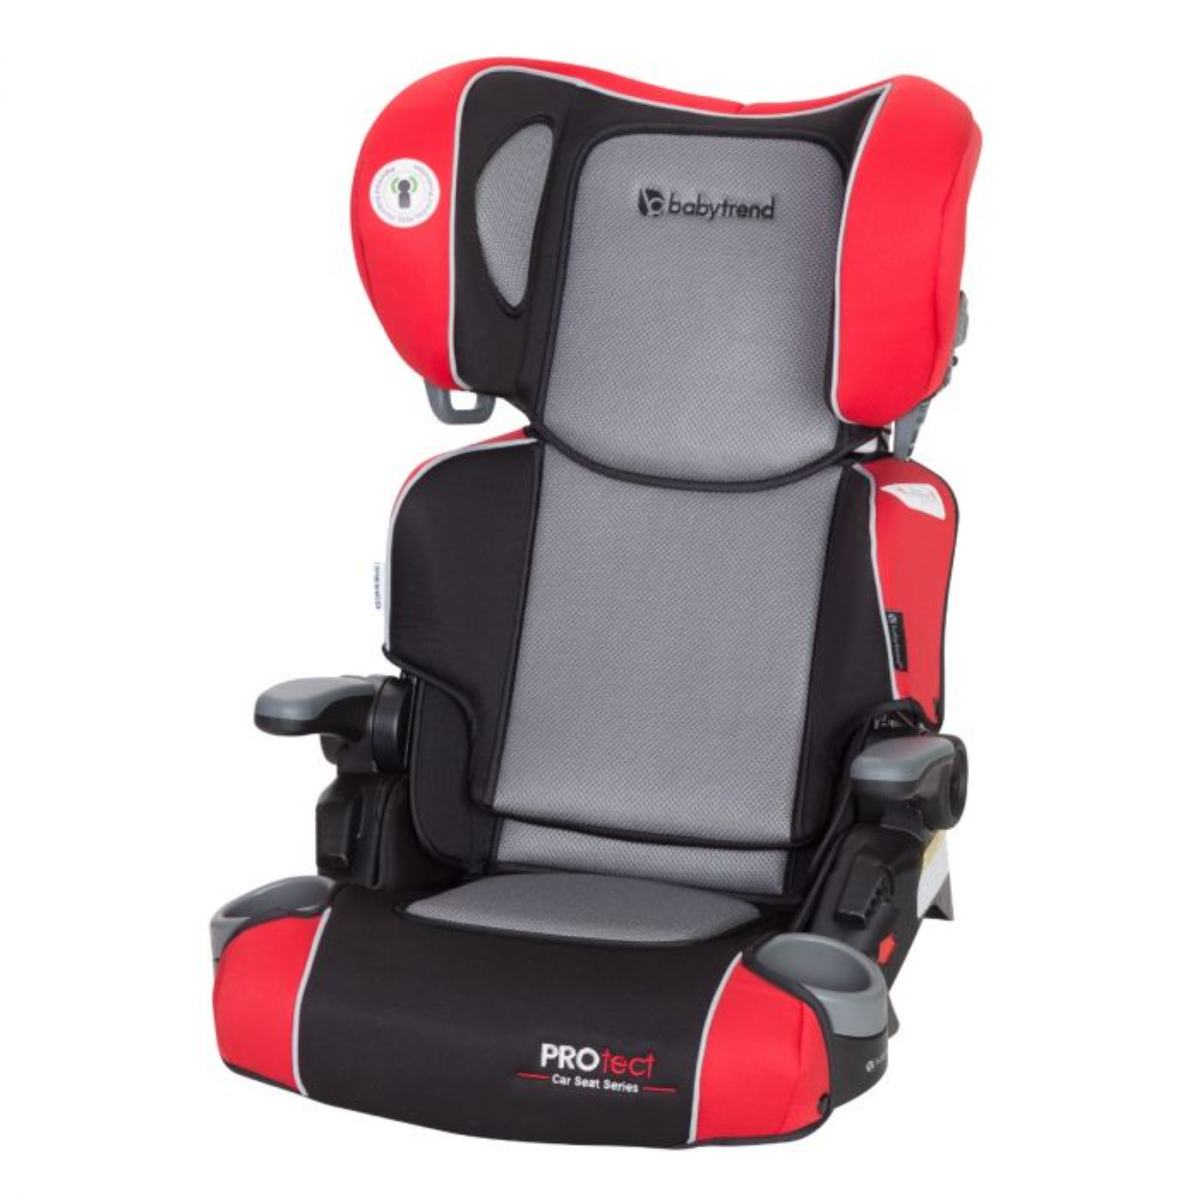 PROtect Car Seat Series Yumi 2-in-1 Folding Booster Seat Riley